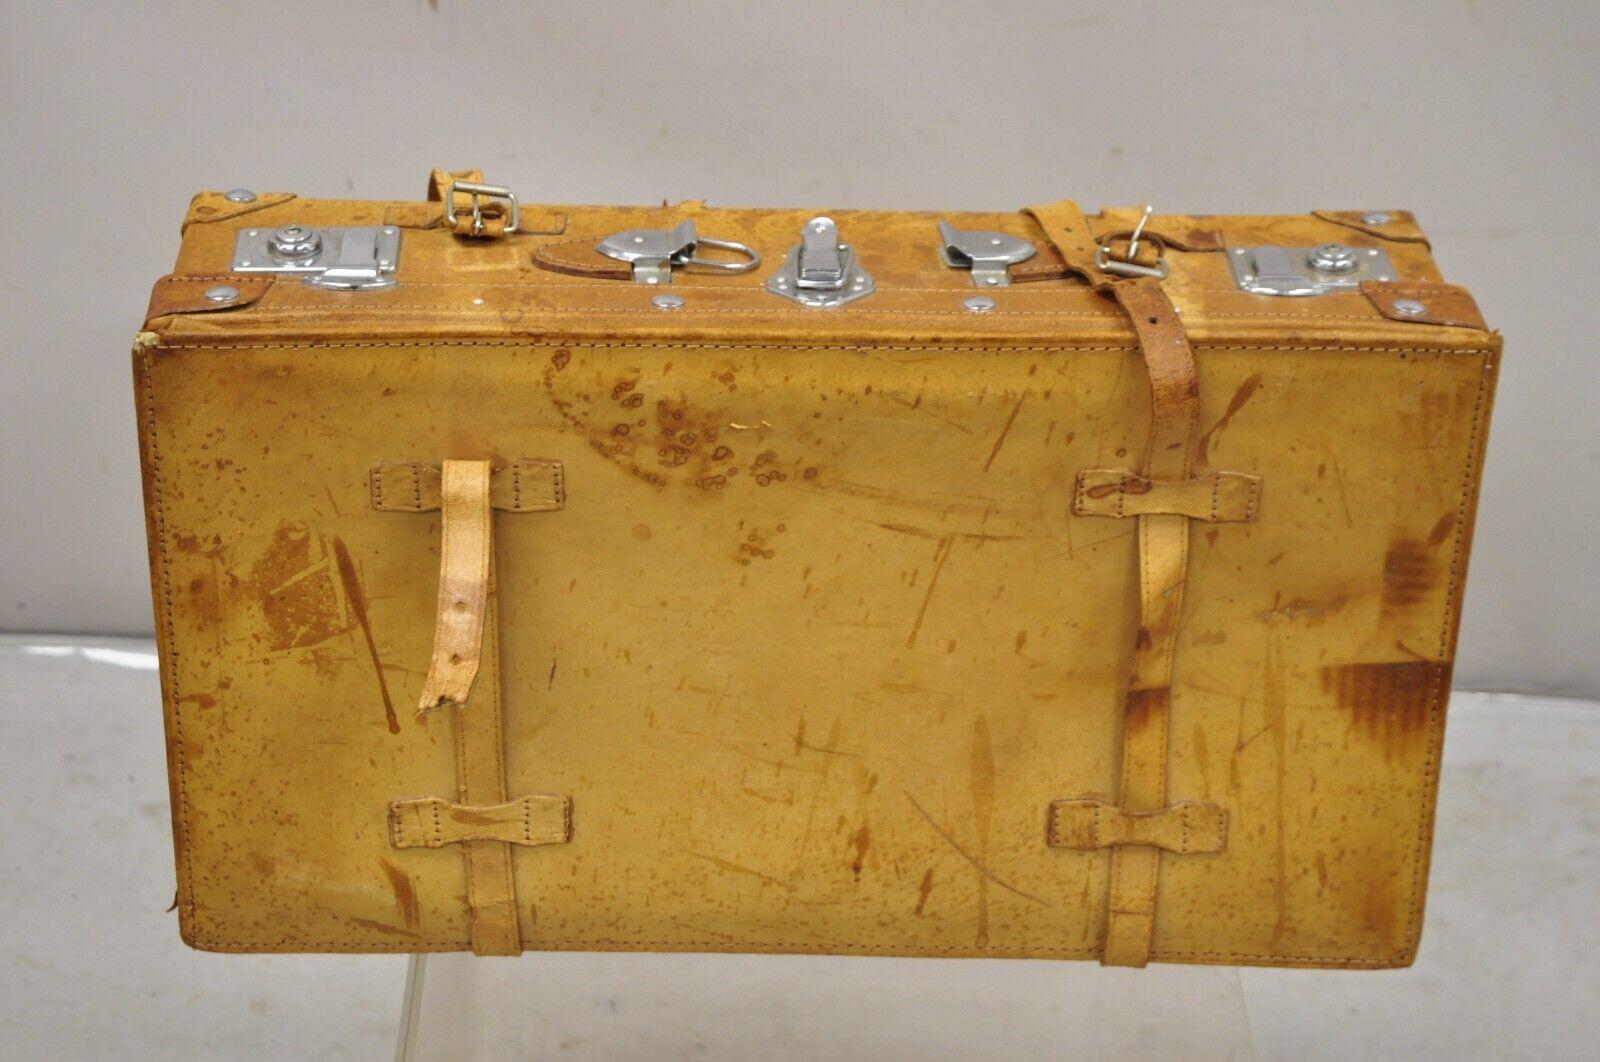 20th Century Vintage Brown Caramel Tan Leather Suitcase Luggage with Chrome Hardware